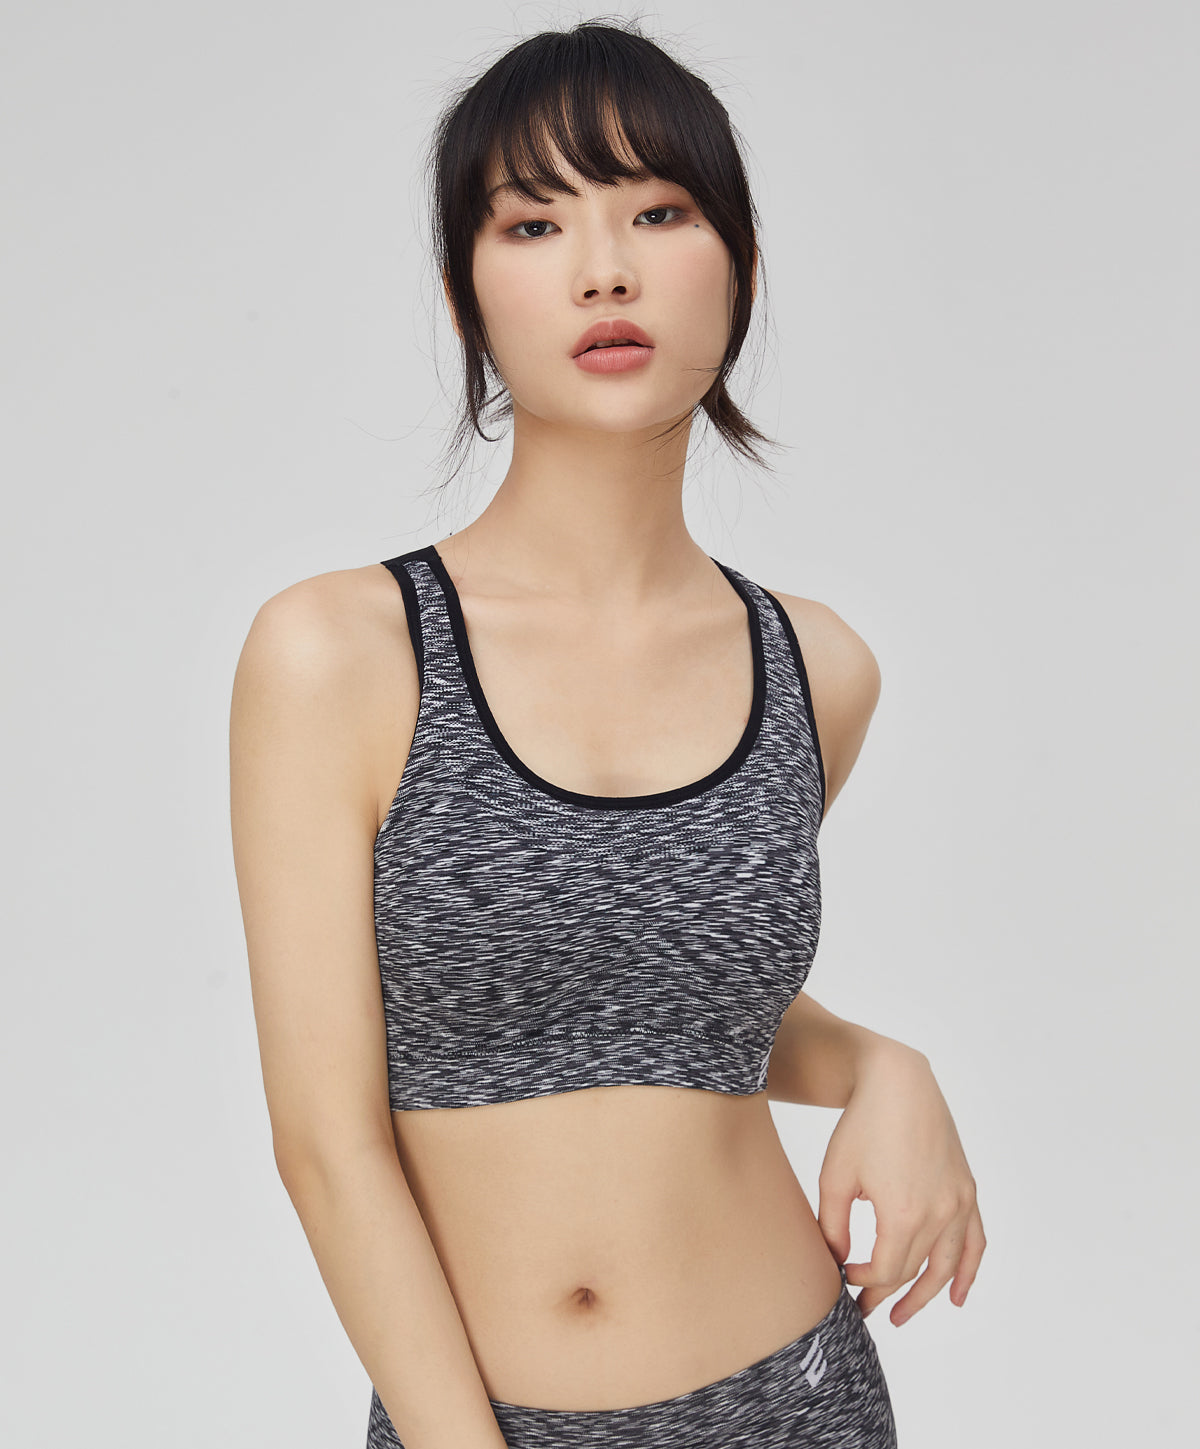 Pierre Cardin Lingerie Indonesia - Our Moisture Wick series has a wide  variety of staple pieces for your active wardrobe ✓ #sportbra  #pierrecardinlingerie #confidentissexy